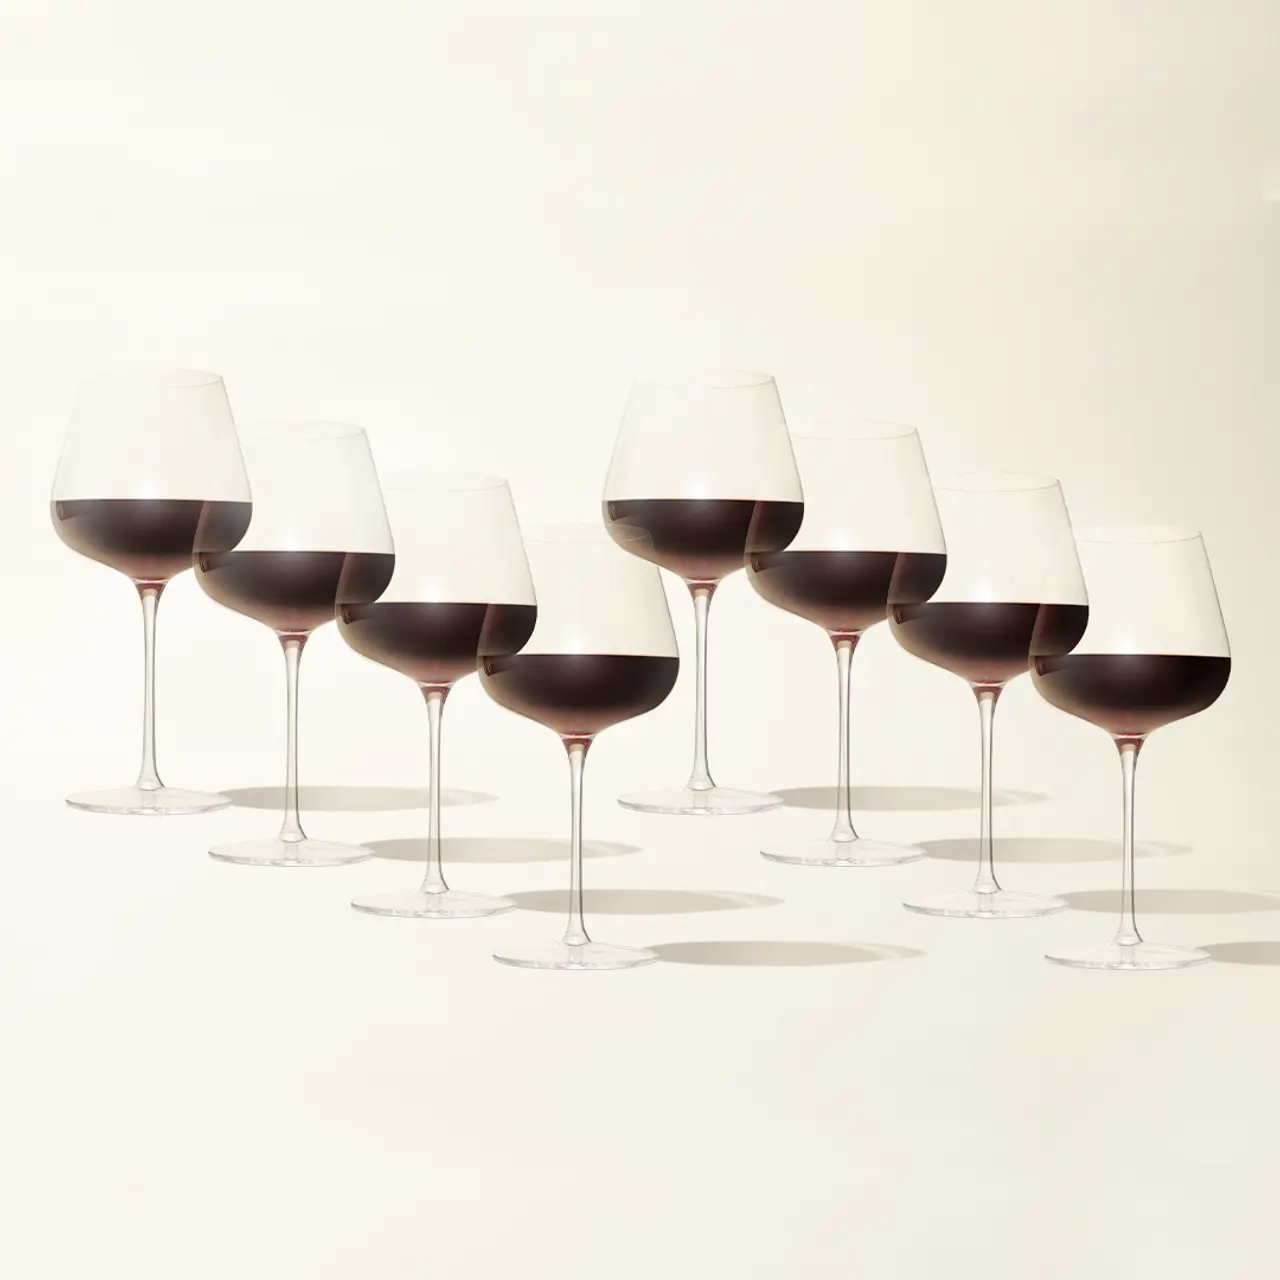 Seven wine glasses filled with red wine are arranged in a row against a light background.